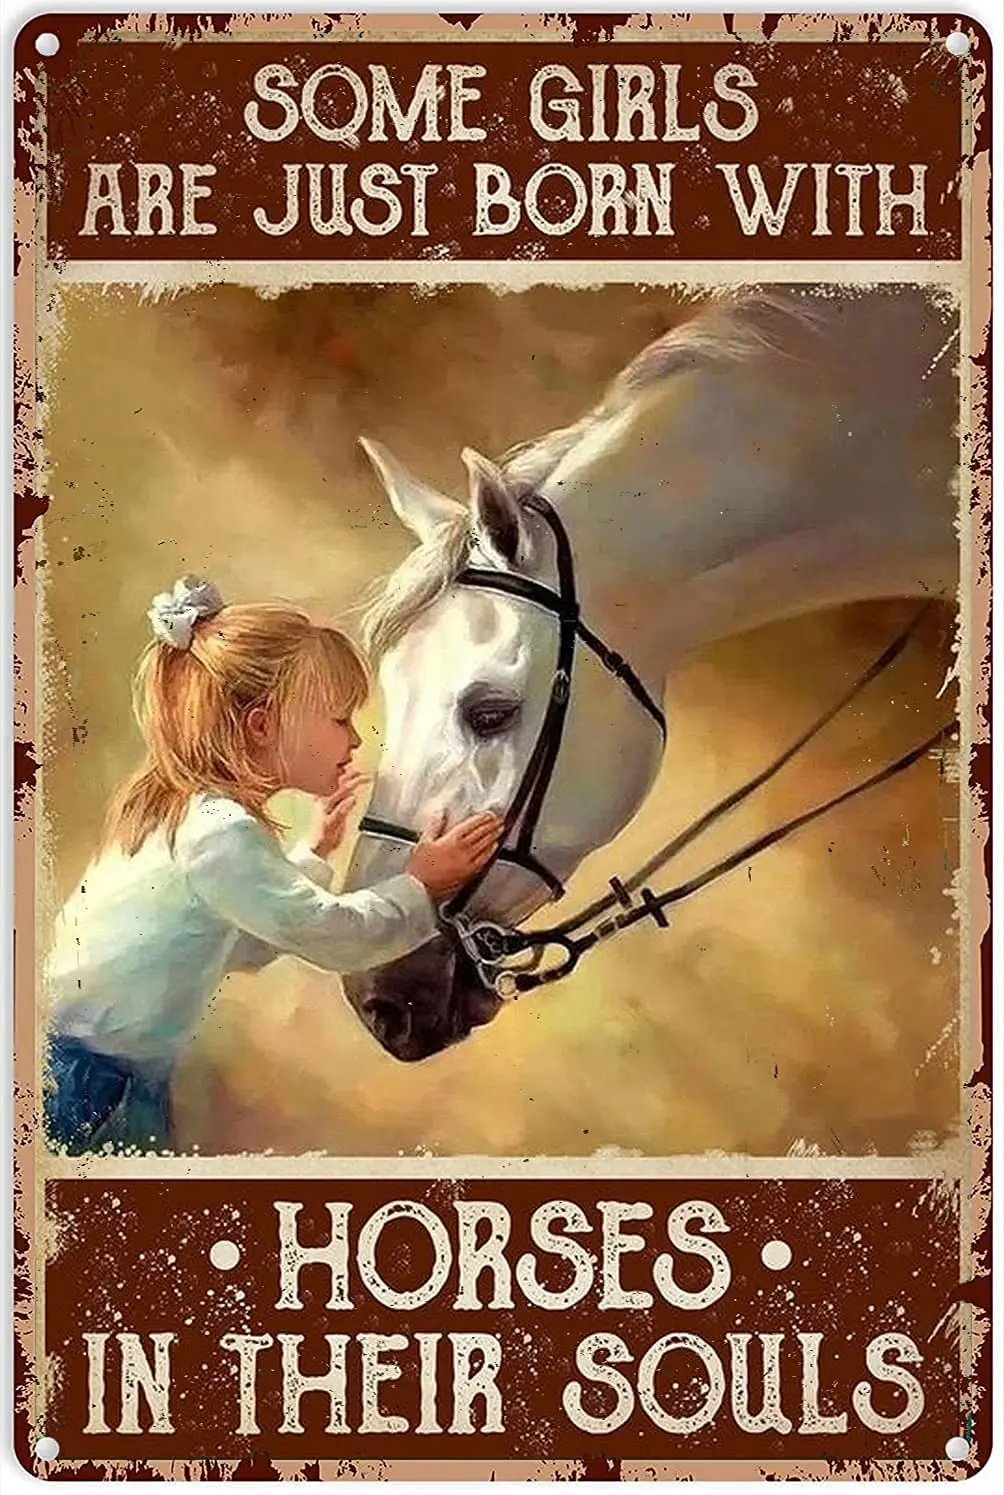 

Horse and Girl Poster Metal Tin Sign, Some Girls are Born to Like Horse Chic Retro Art Interesting Garage Home Cafe Kitchen 8x12